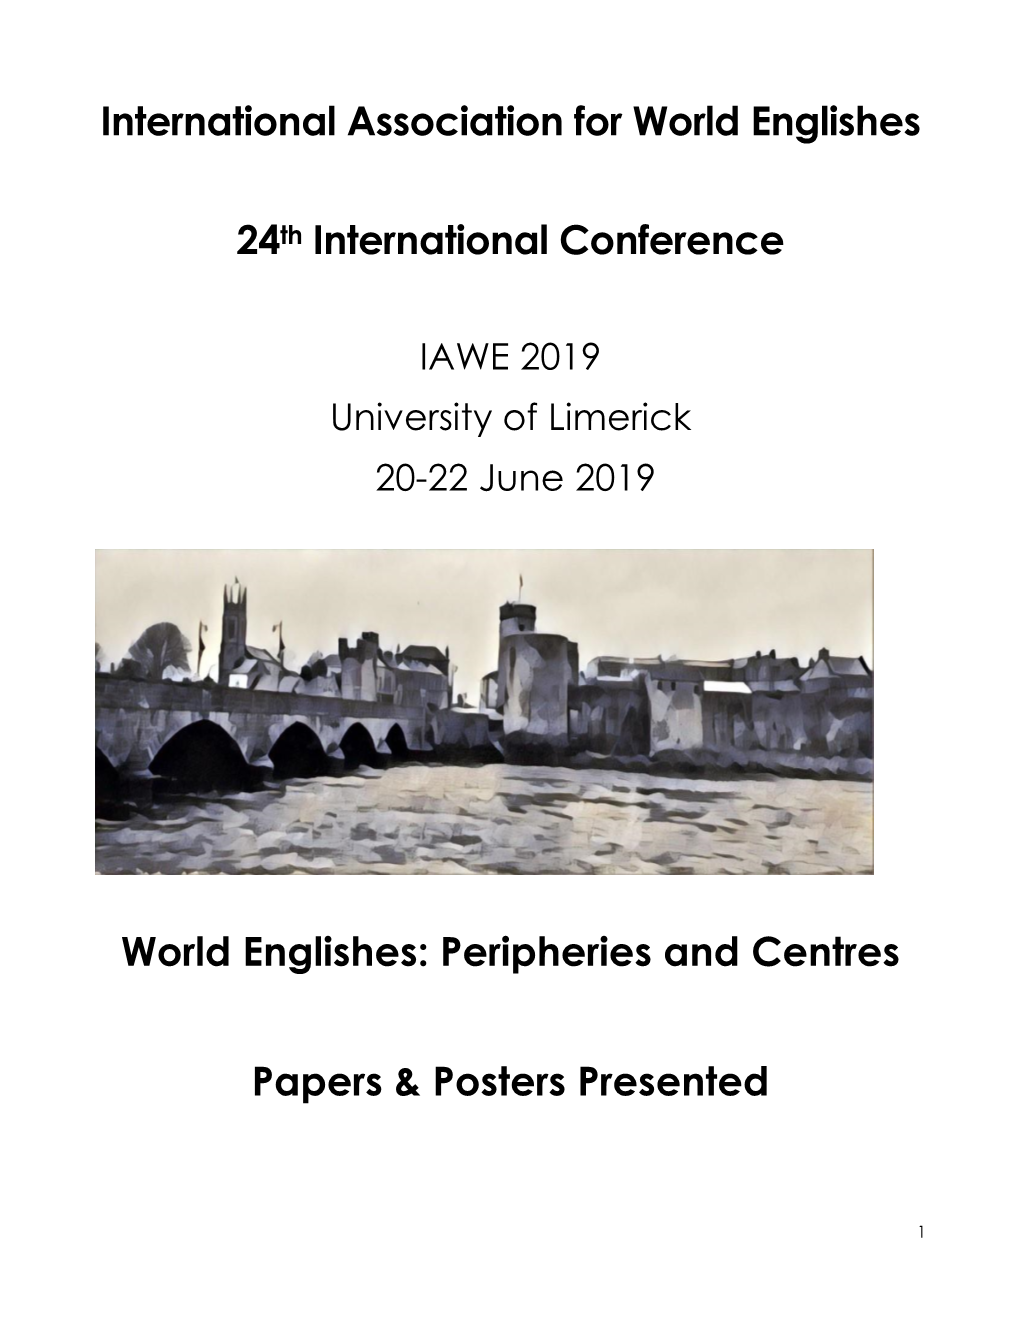 Book of Abstracts June 2019